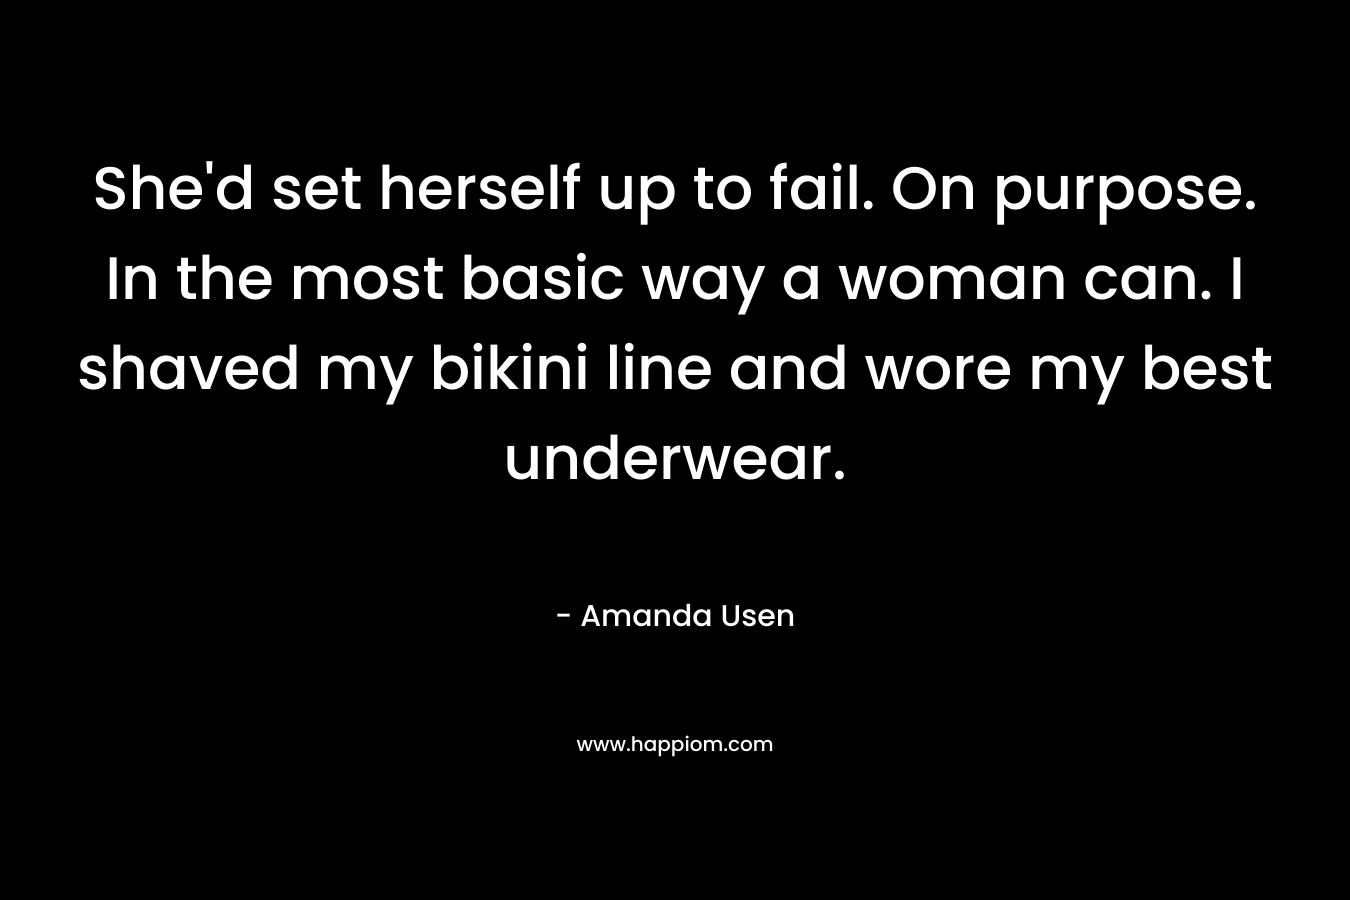 She’d set herself up to fail. On purpose. In the most basic way a woman can. I shaved my bikini line and wore my best underwear. – Amanda Usen